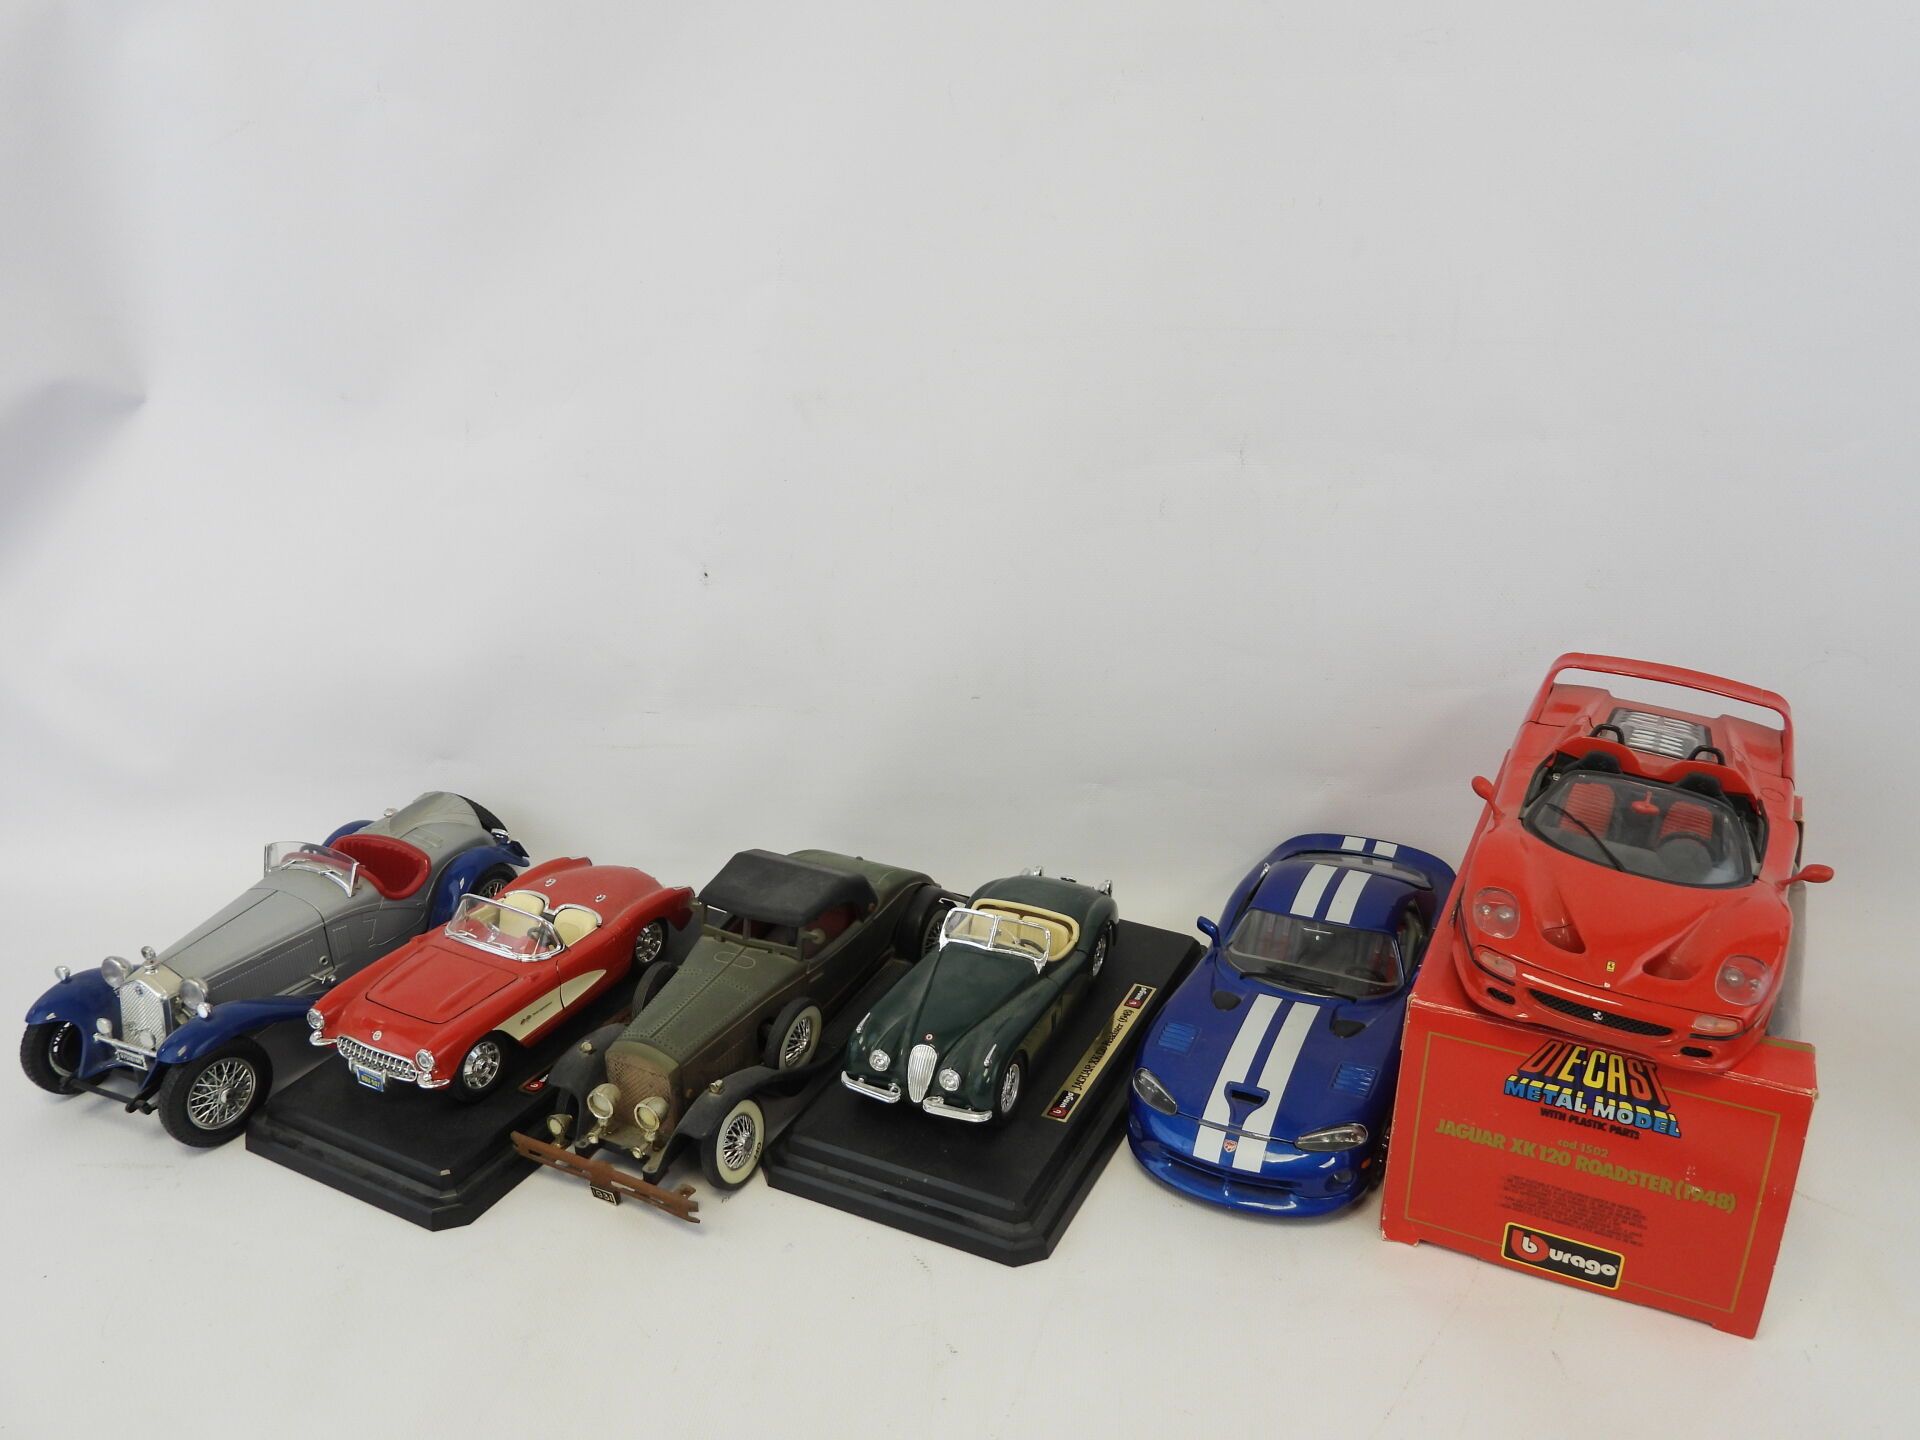 Null BURAGO: Six model cars. 

One box and two cars of unknown make are attached